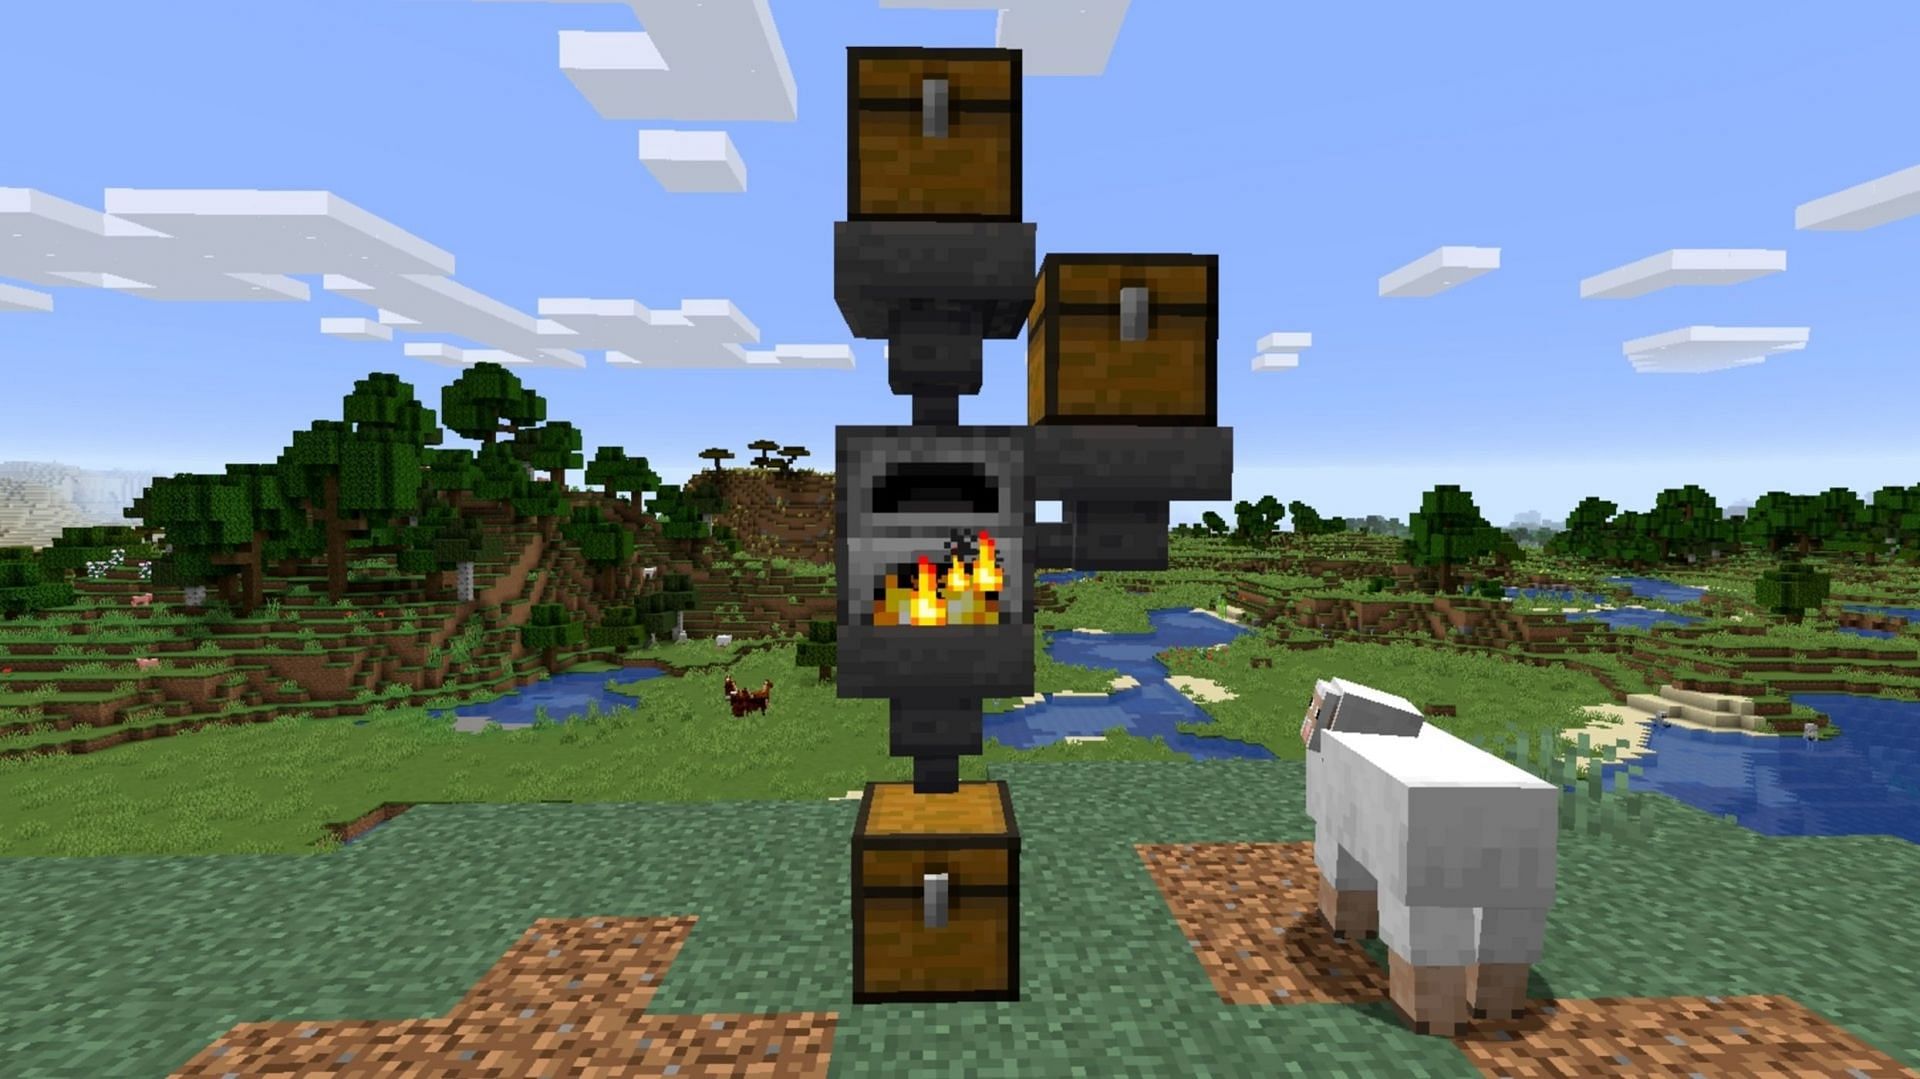 As long as there&#039;s fuel available, auto smelters will work their magic (Image via Mojang)